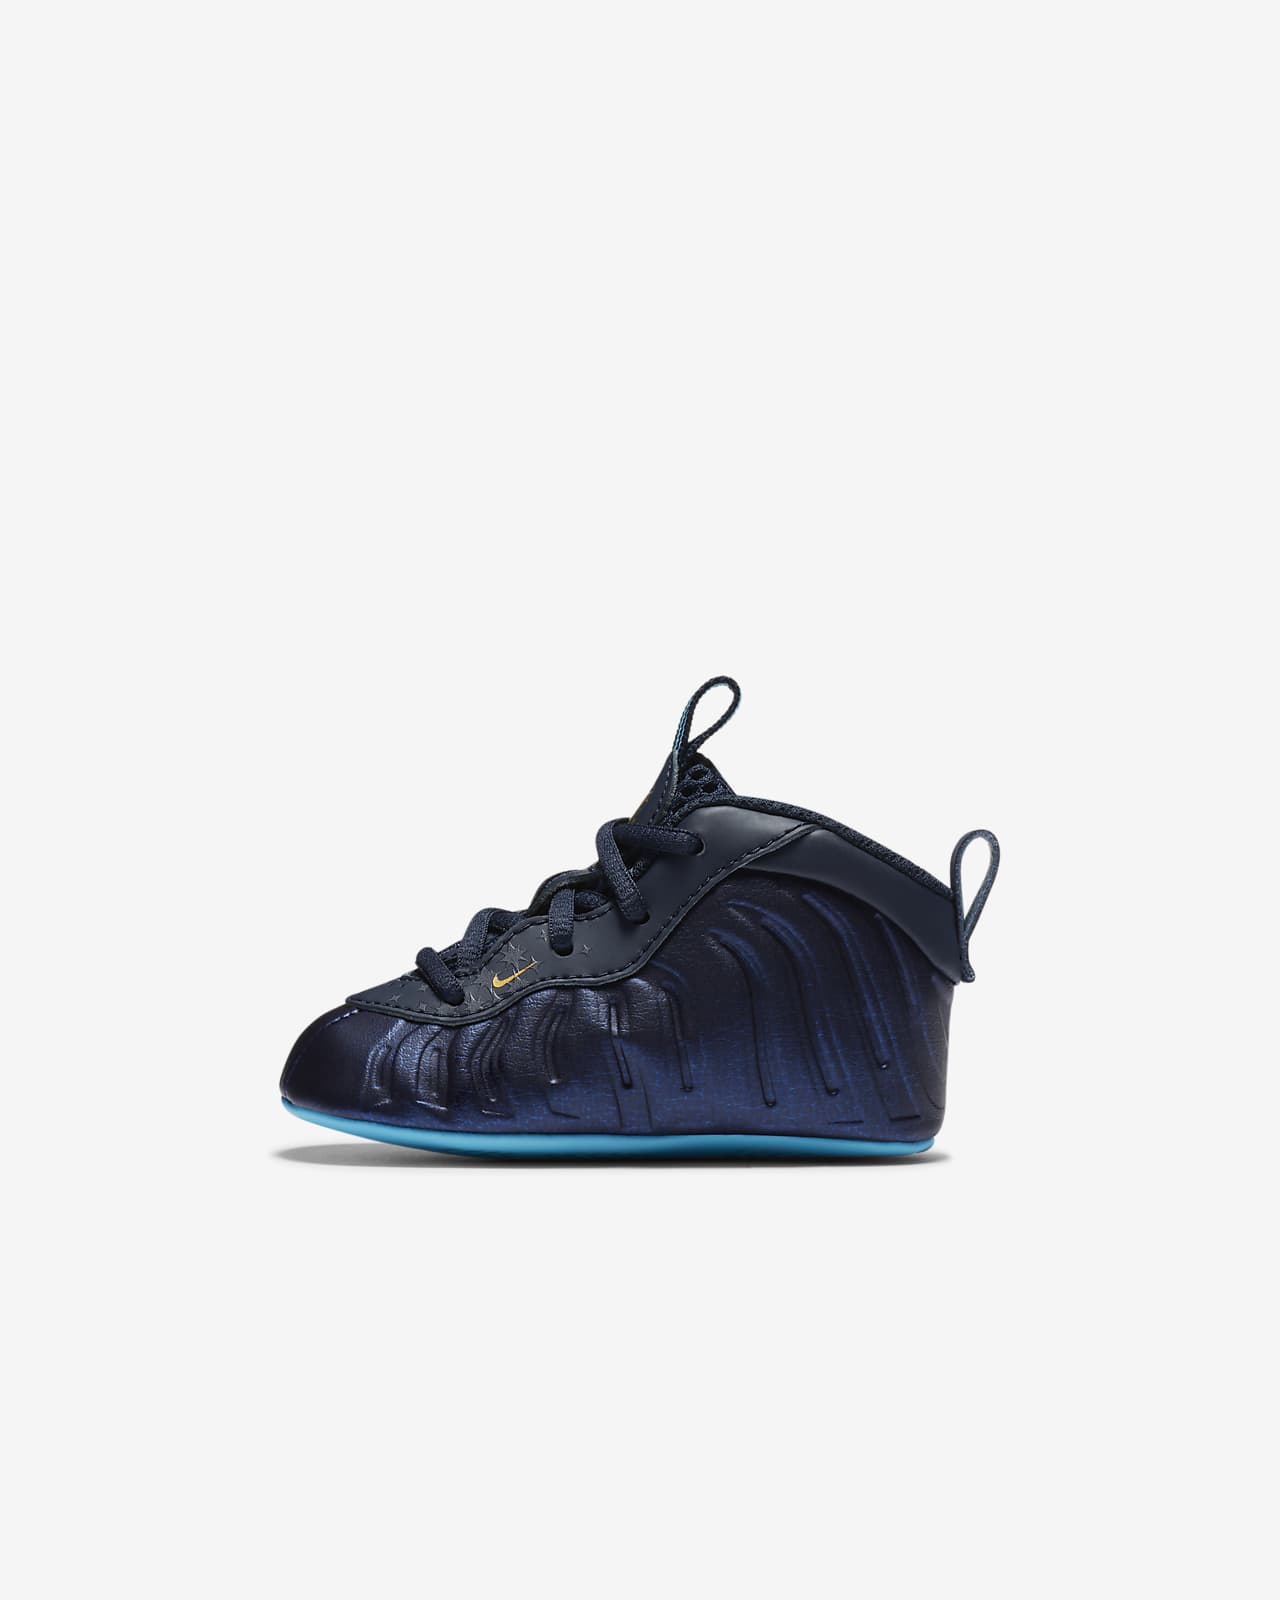 Nike Lil' Posite One Baby/Toddler Crib 